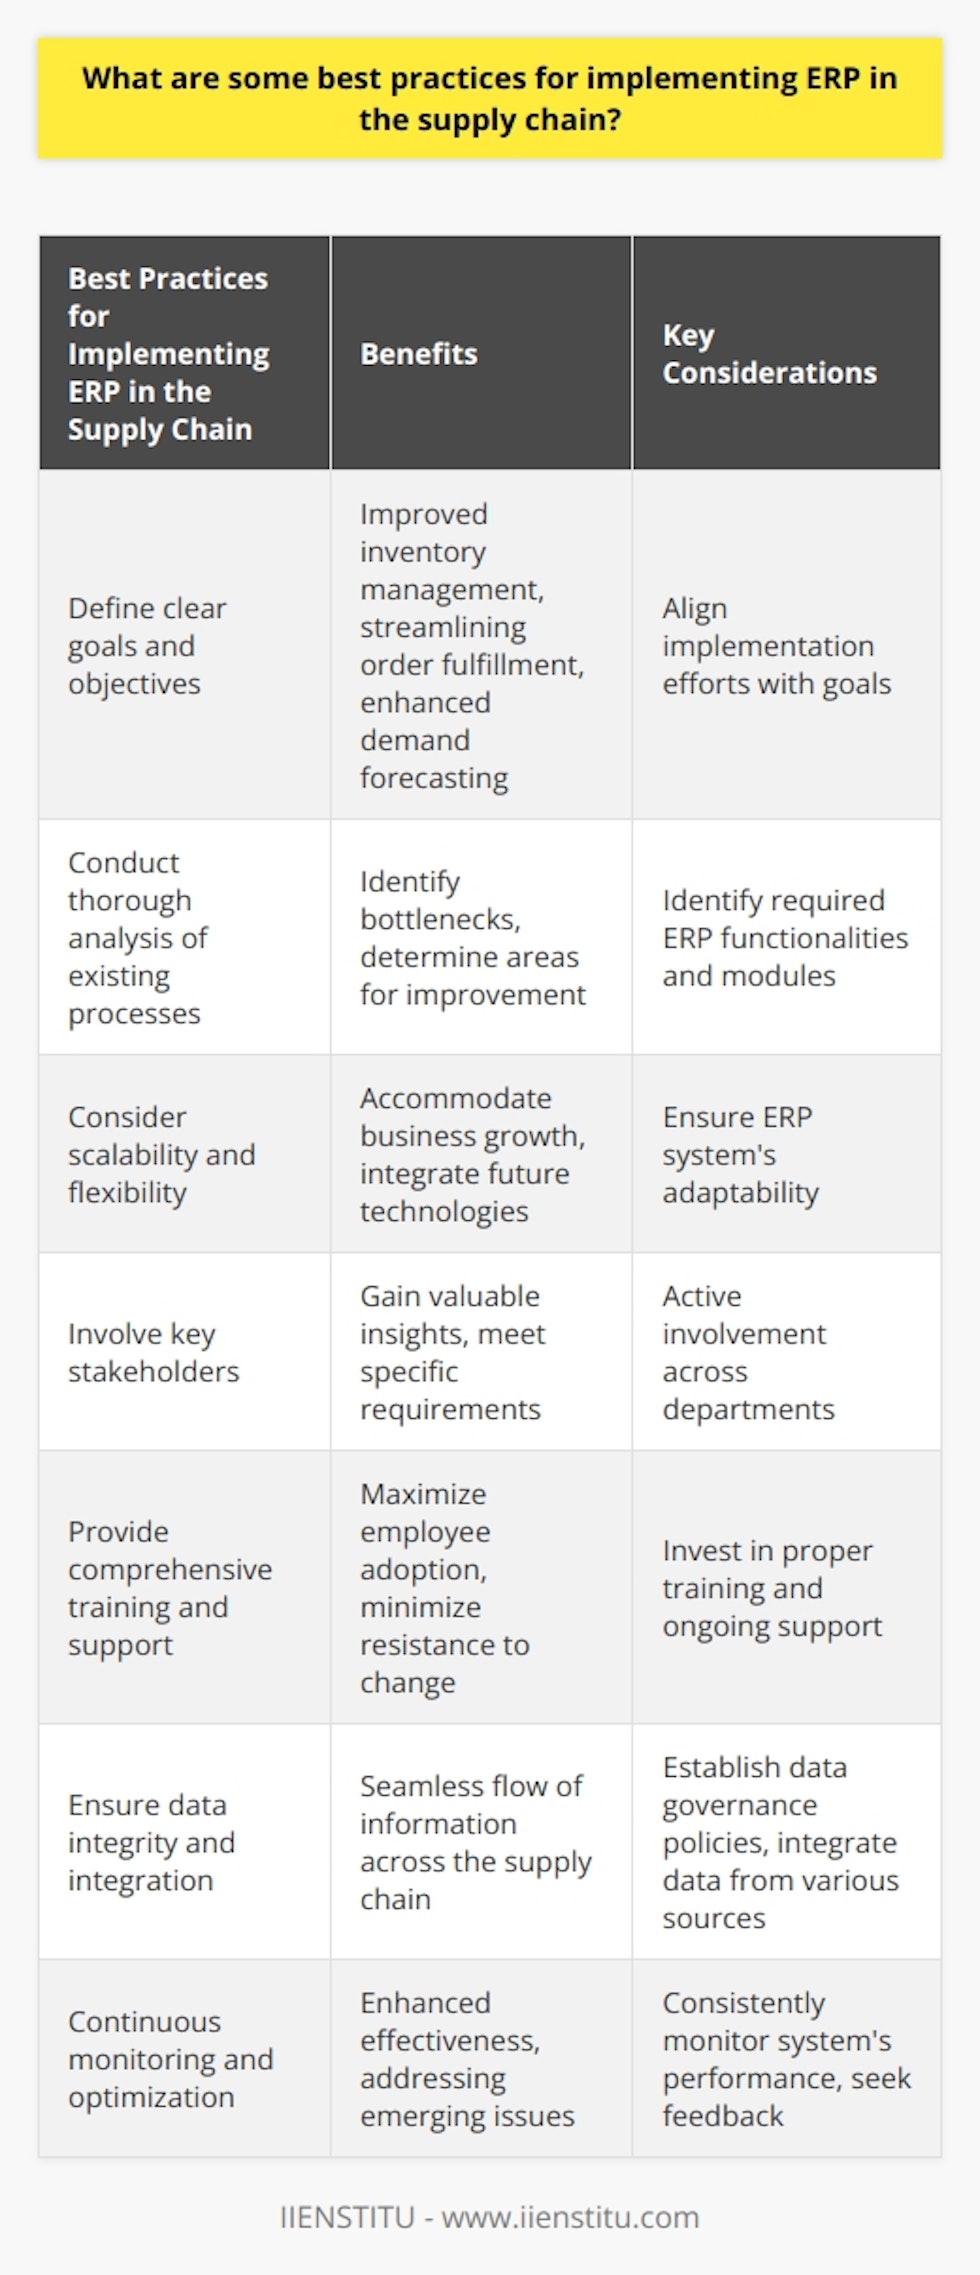 1. Define clear goals and objectives: Before embarking on an ERP implementation in the supply chain, it is essential to establish clear goals and objectives. This can include improving inventory management, streamlining order fulfillment, or enhancing demand forecasting. By clearly identifying these goals, organizations can align their implementation efforts accordingly.2. Conduct a thorough analysis of existing processes: It is crucial to understand and analyze existing processes within the supply chain before implementing ERP. This involves mapping out the current workflow, identifying bottlenecks, and determining areas for improvement. By conducting a comprehensive analysis, organizations can identify the specific functionalities and modules required from an ERP system.3. Consider scalability and flexibility: ERP systems should be able to adapt to changing business needs and evolving industry trends. When implementing ERP in the supply chain, it is important to consider the system's scalability and flexibility. This ensures that the solution can easily accommodate business growth and integrate with future technologies.4. Involve key stakeholders: Successful ERP implementation in the supply chain requires active involvement from key stakeholders across various departments, including logistics, procurement, and sales. By involving these individuals from the early stages of the implementation process, organizations can gain valuable insights and ensure the system meets their specific requirements.5. Provide comprehensive training and support: ERP systems can be complex, and employees may need training to effectively utilize the new technology. It is crucial to provide comprehensive training to all relevant personnel involved in the supply chain. This can include conducting workshops, providing user manuals, and offering ongoing support. By investing in proper training and support, organizations can minimize resistance to change and maximize employee adoption.6. Ensure data integrity and integration: ERP systems rely heavily on accurate and integrated data. When implementing ERP in the supply chain, it is essential to ensure data integrity by establishing data governance policies and procedures. Organizations should also focus on integrating data from various sources and systems to ensure a seamless flow of information across the supply chain.7. Continuous monitoring and optimization: ERP implementation is not a one-time event but an ongoing process. Organizations should continuously monitor the system's performance and identify areas for optimization. This can involve conducting regular audits, analyzing key performance indicators, and seeking feedback from end-users. By consistently monitoring and optimizing the ERP system, organizations can enhance its effectiveness and address any emerging issues.Implementing ERP in the supply chain can be a complex undertaking, but by following these best practices, organizations can increase the chances of a successful implementation. With proper planning, stakeholder involvement, and ongoing optimization, businesses can leverage ERP to streamline their supply chain operations and gain a competitive edge.